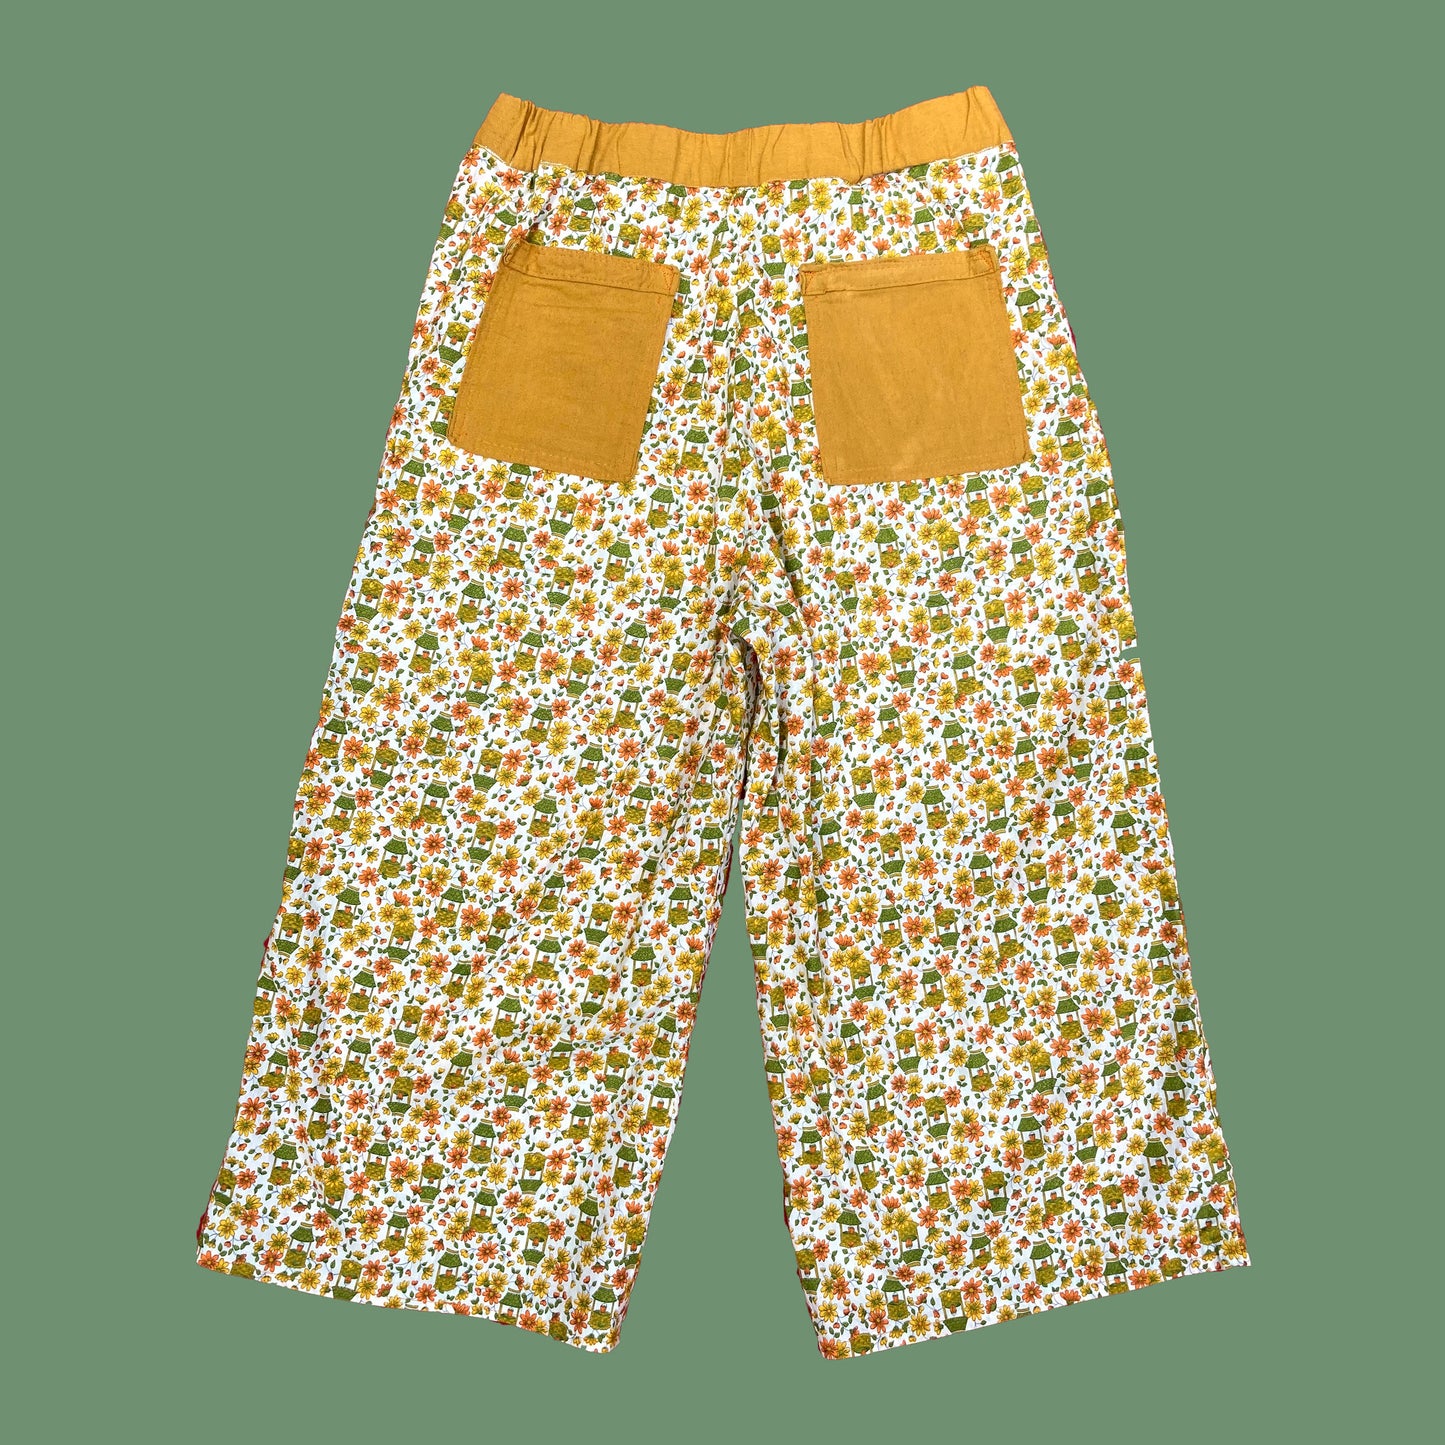 Wishing Well Culottes